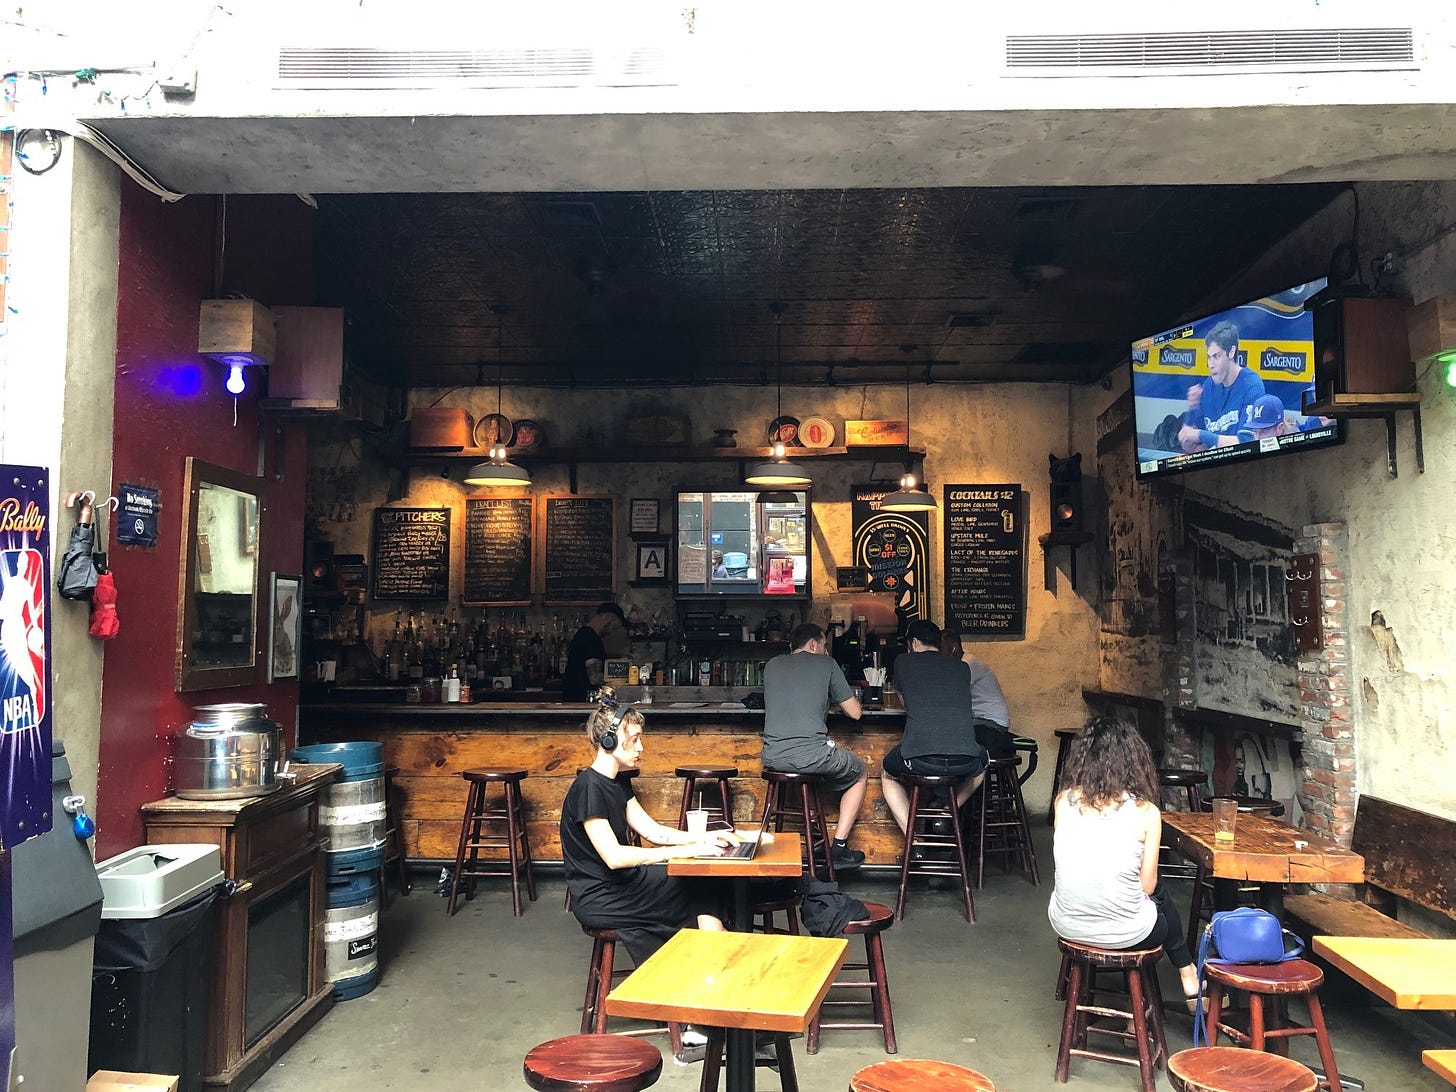 The interior of Mission Dolores' bar